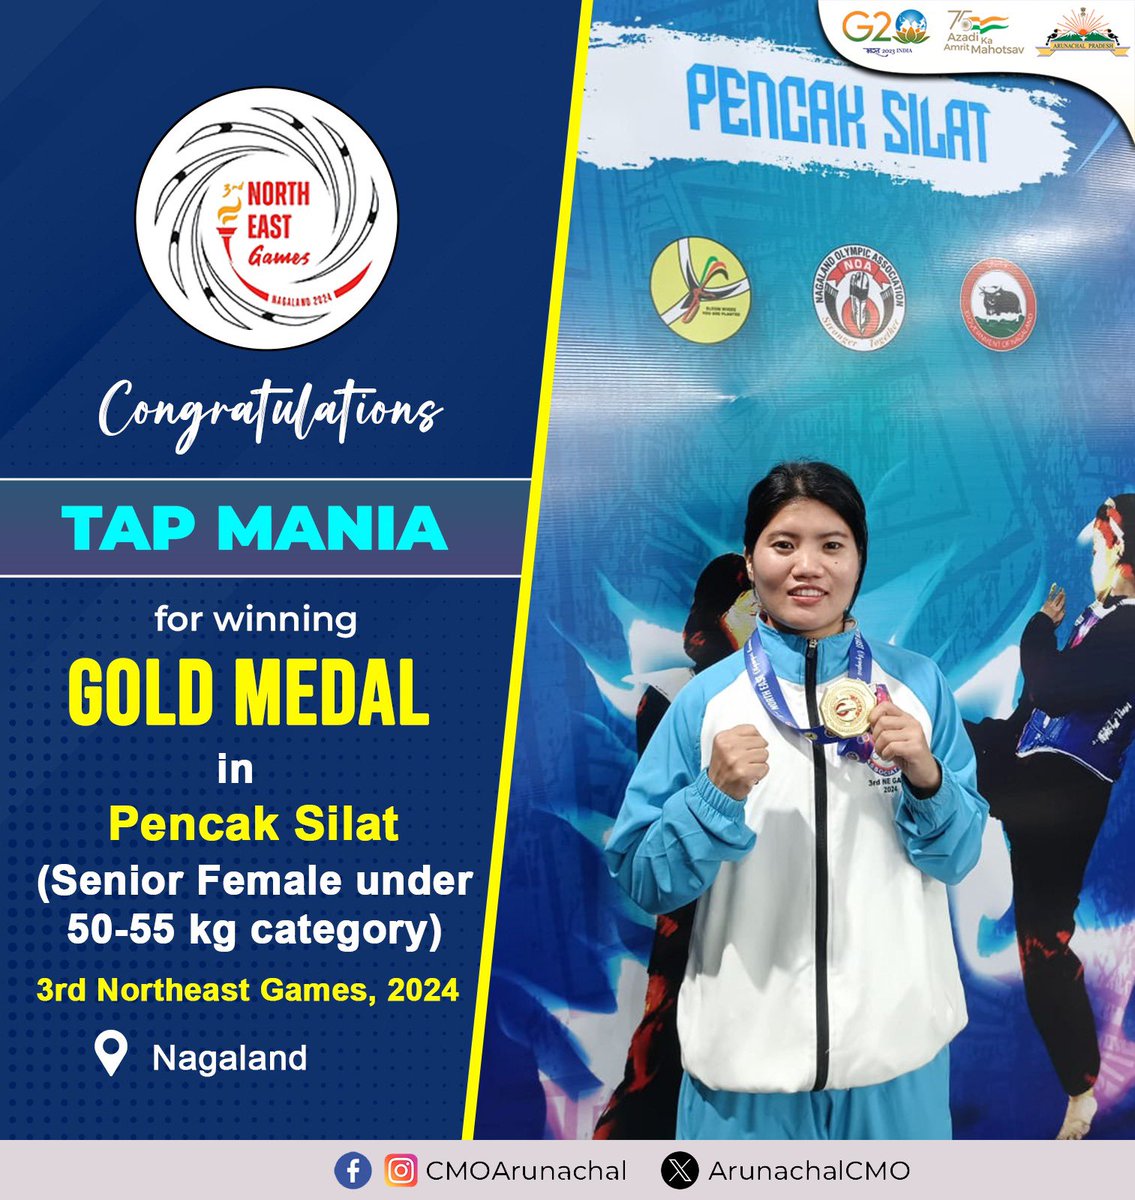 Congratulations to Tap Mania for clinching the Gold Medal in Pencak Silat at the 3rd NEG, 2024! Tap Mania's victory against Assam in the final match marks a historic moment as the first Gold medalist for Arunachal Pradesh. Well done on this remarkable achievement! #PencakSilat